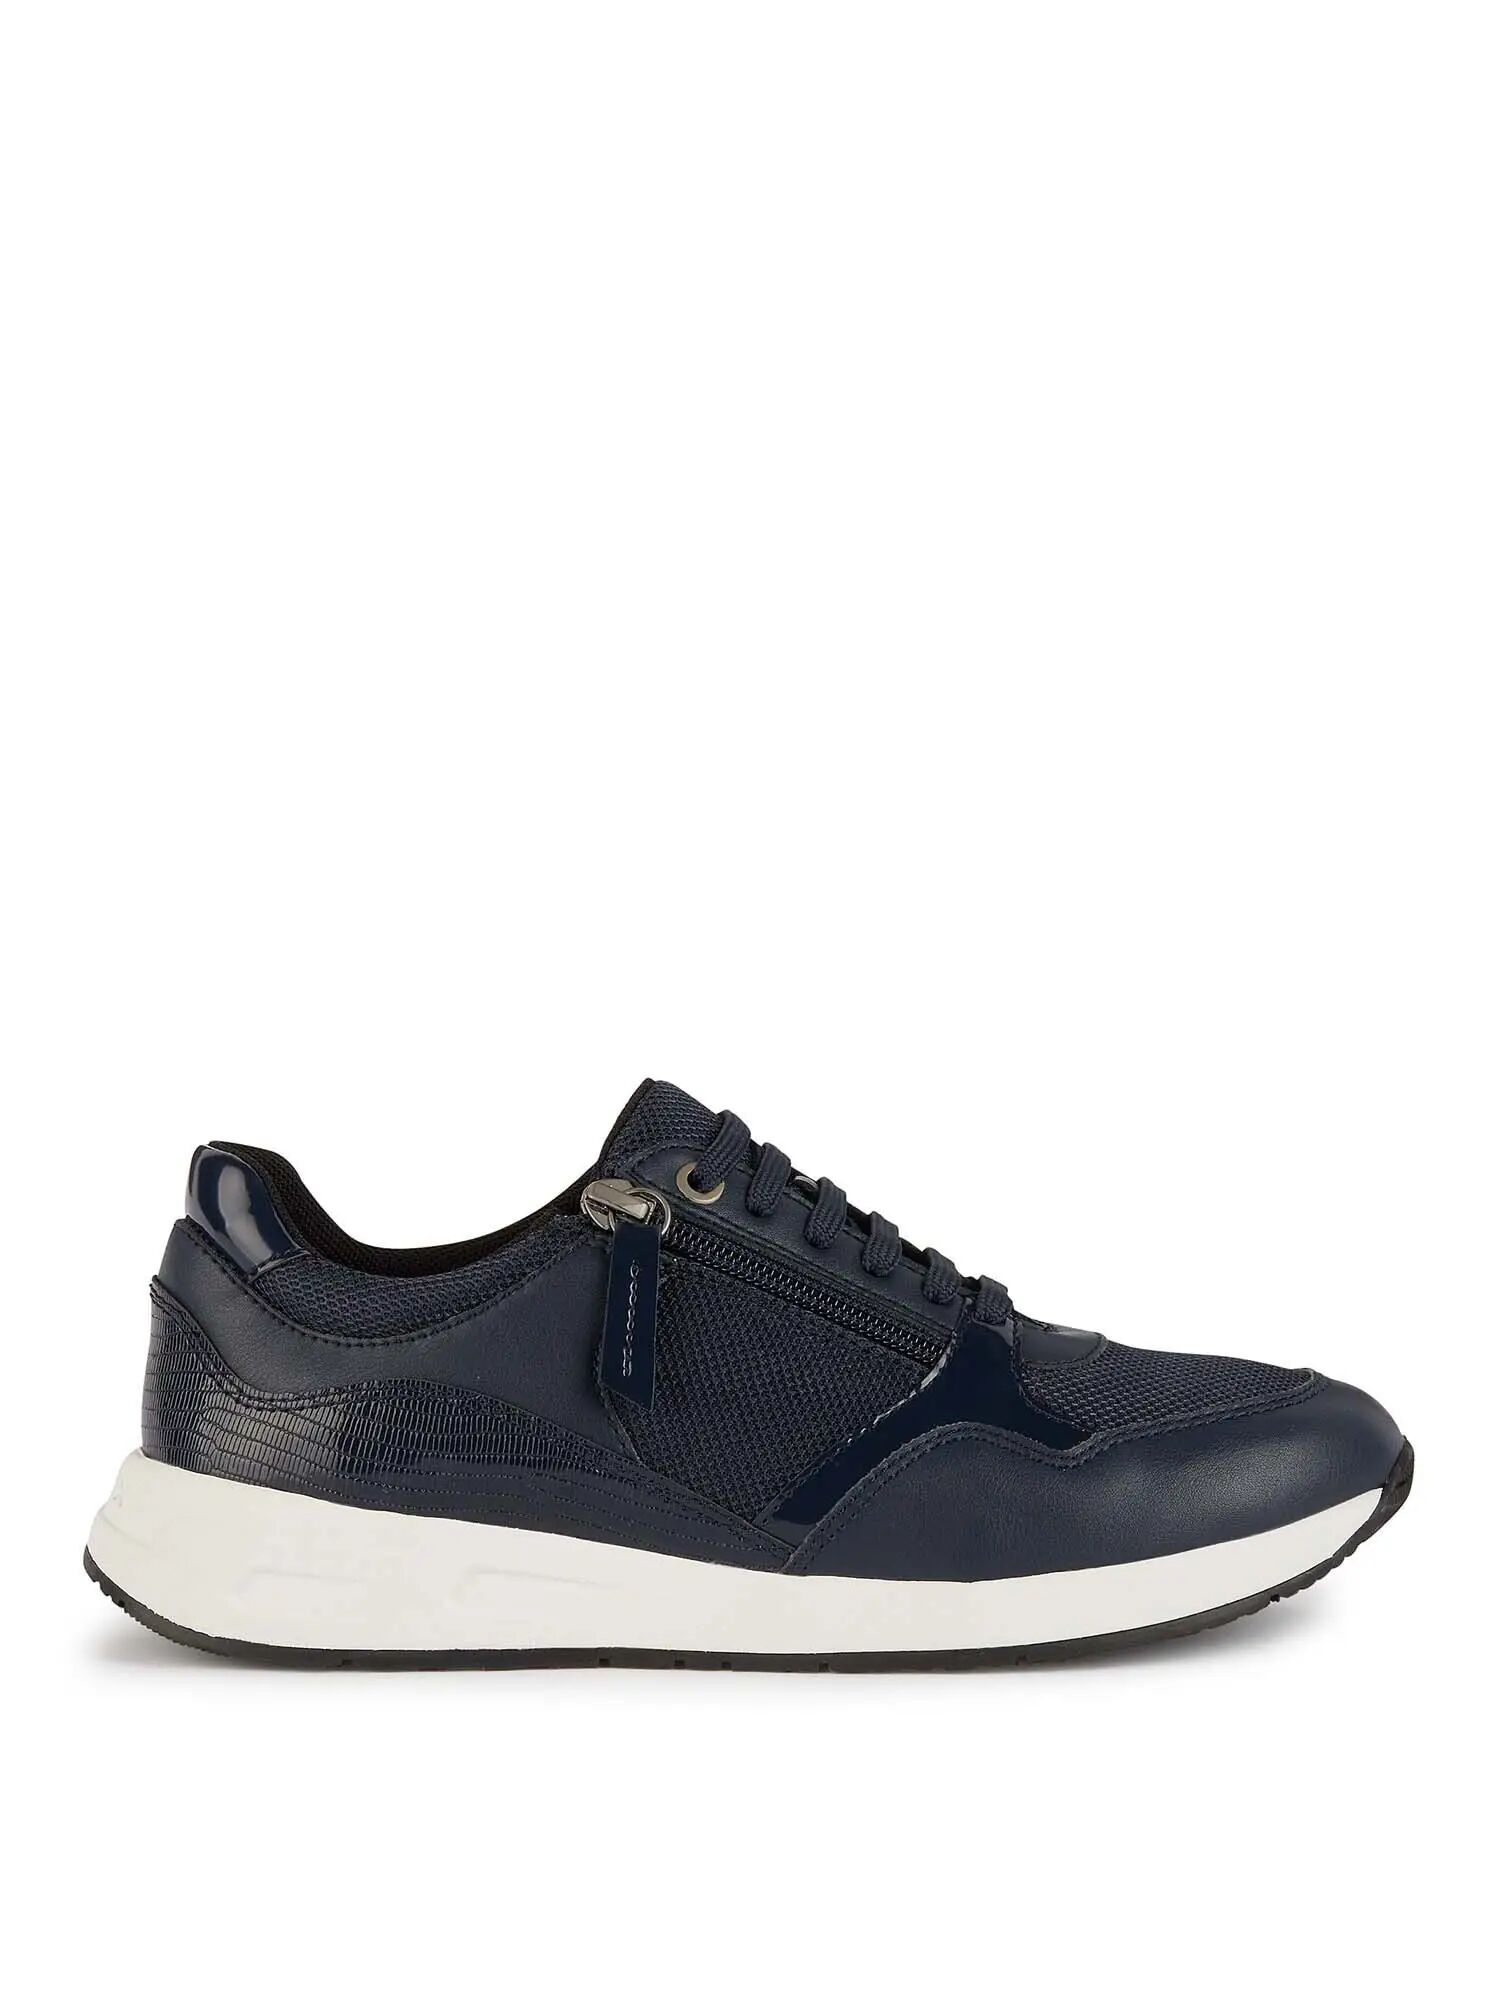 Geox Sneakers Donna Colore Navy NAVY 35